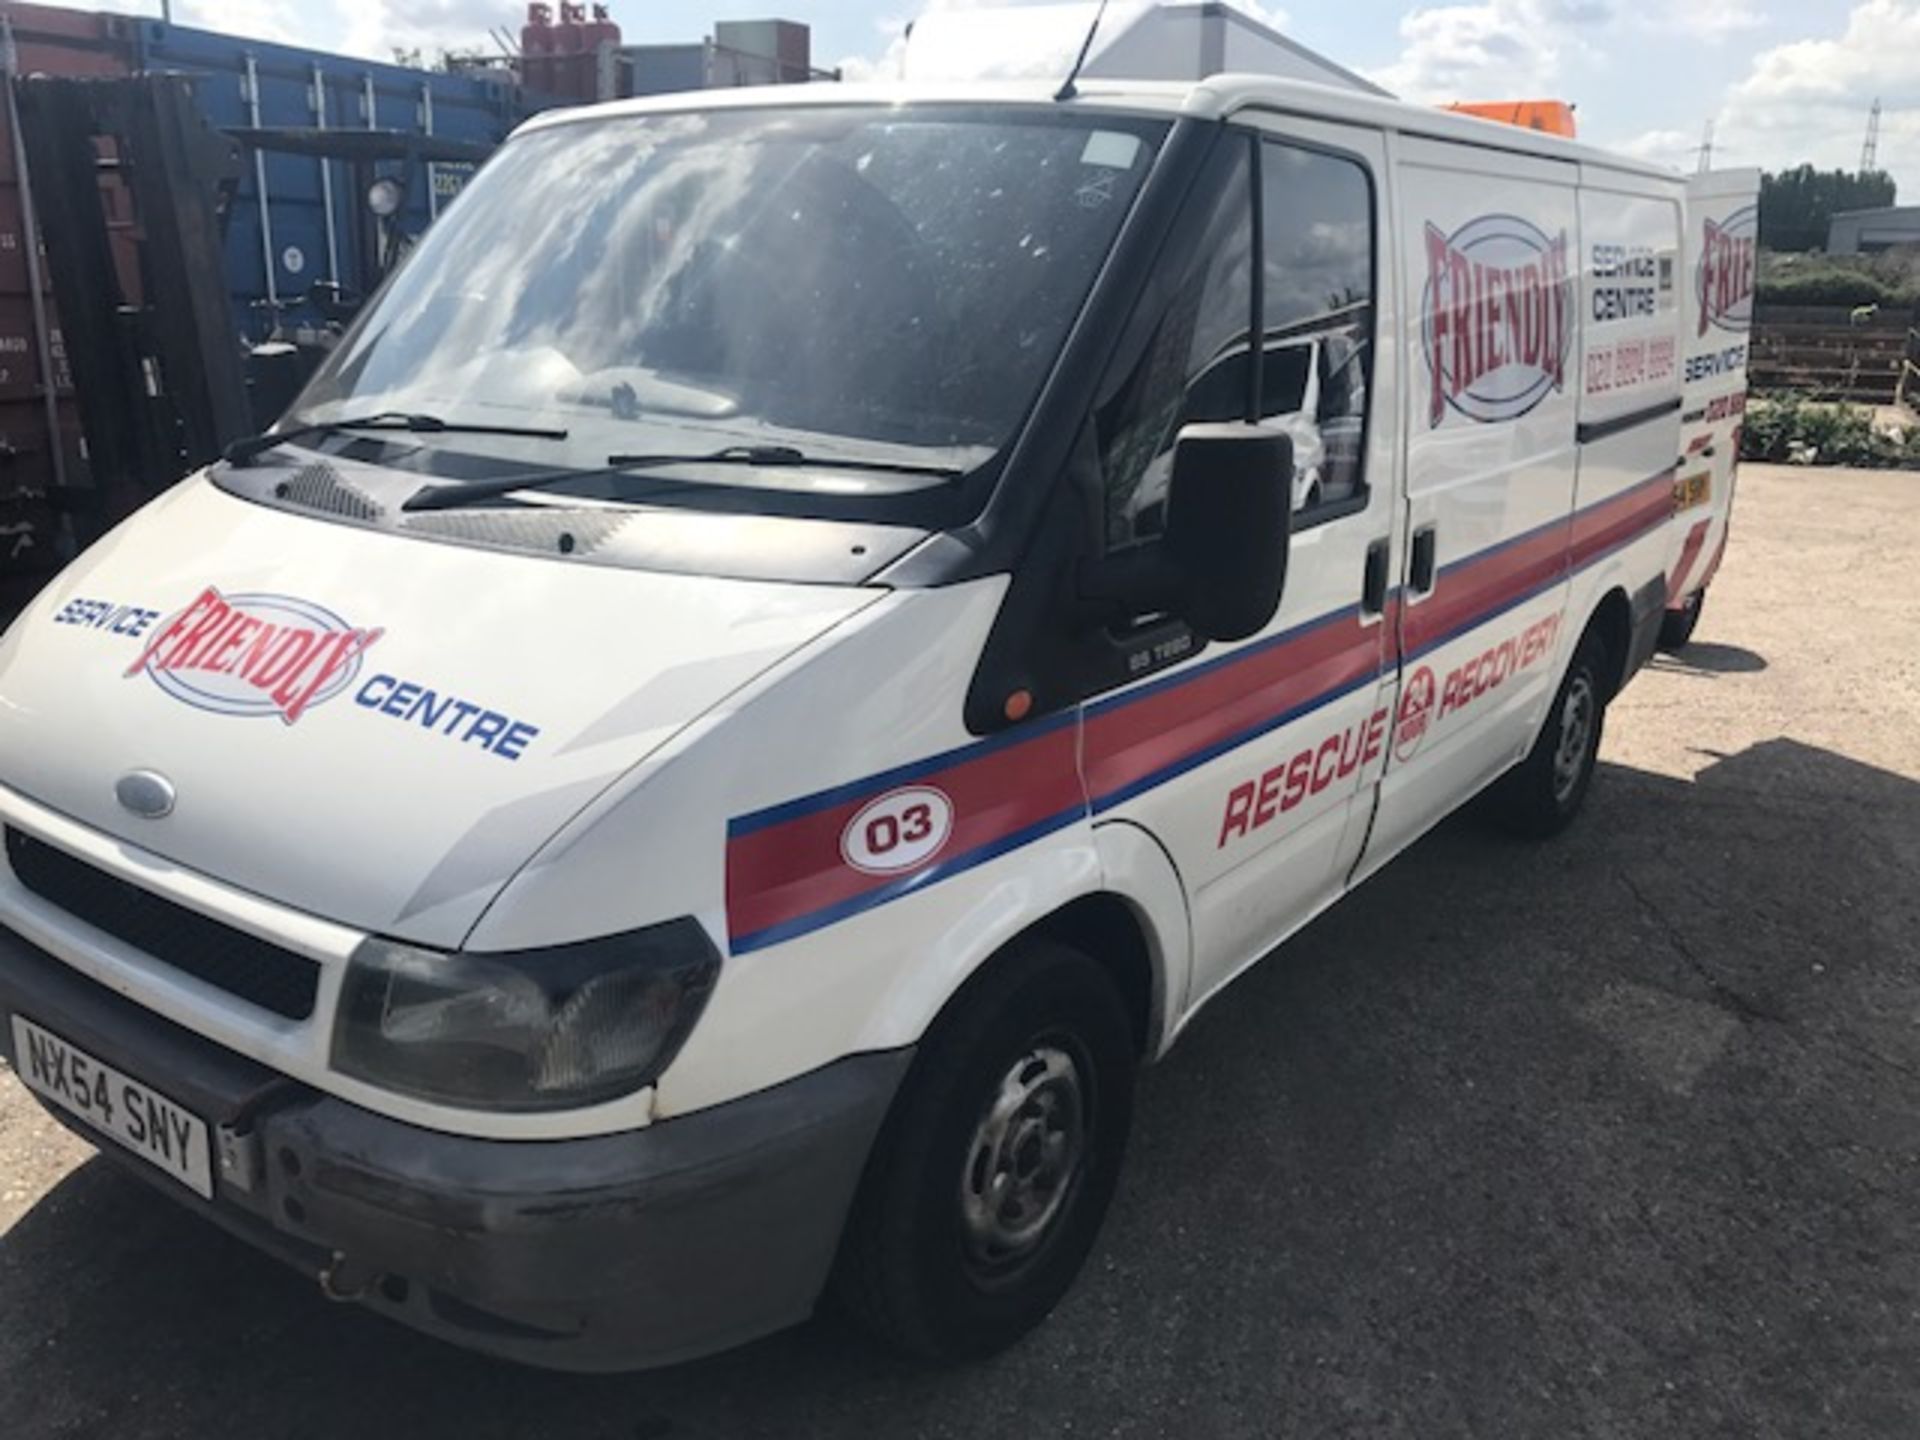 2004 Ford Transit T280 panel van complete with Interntrade Engineering Limited towing dolly, - Image 2 of 15